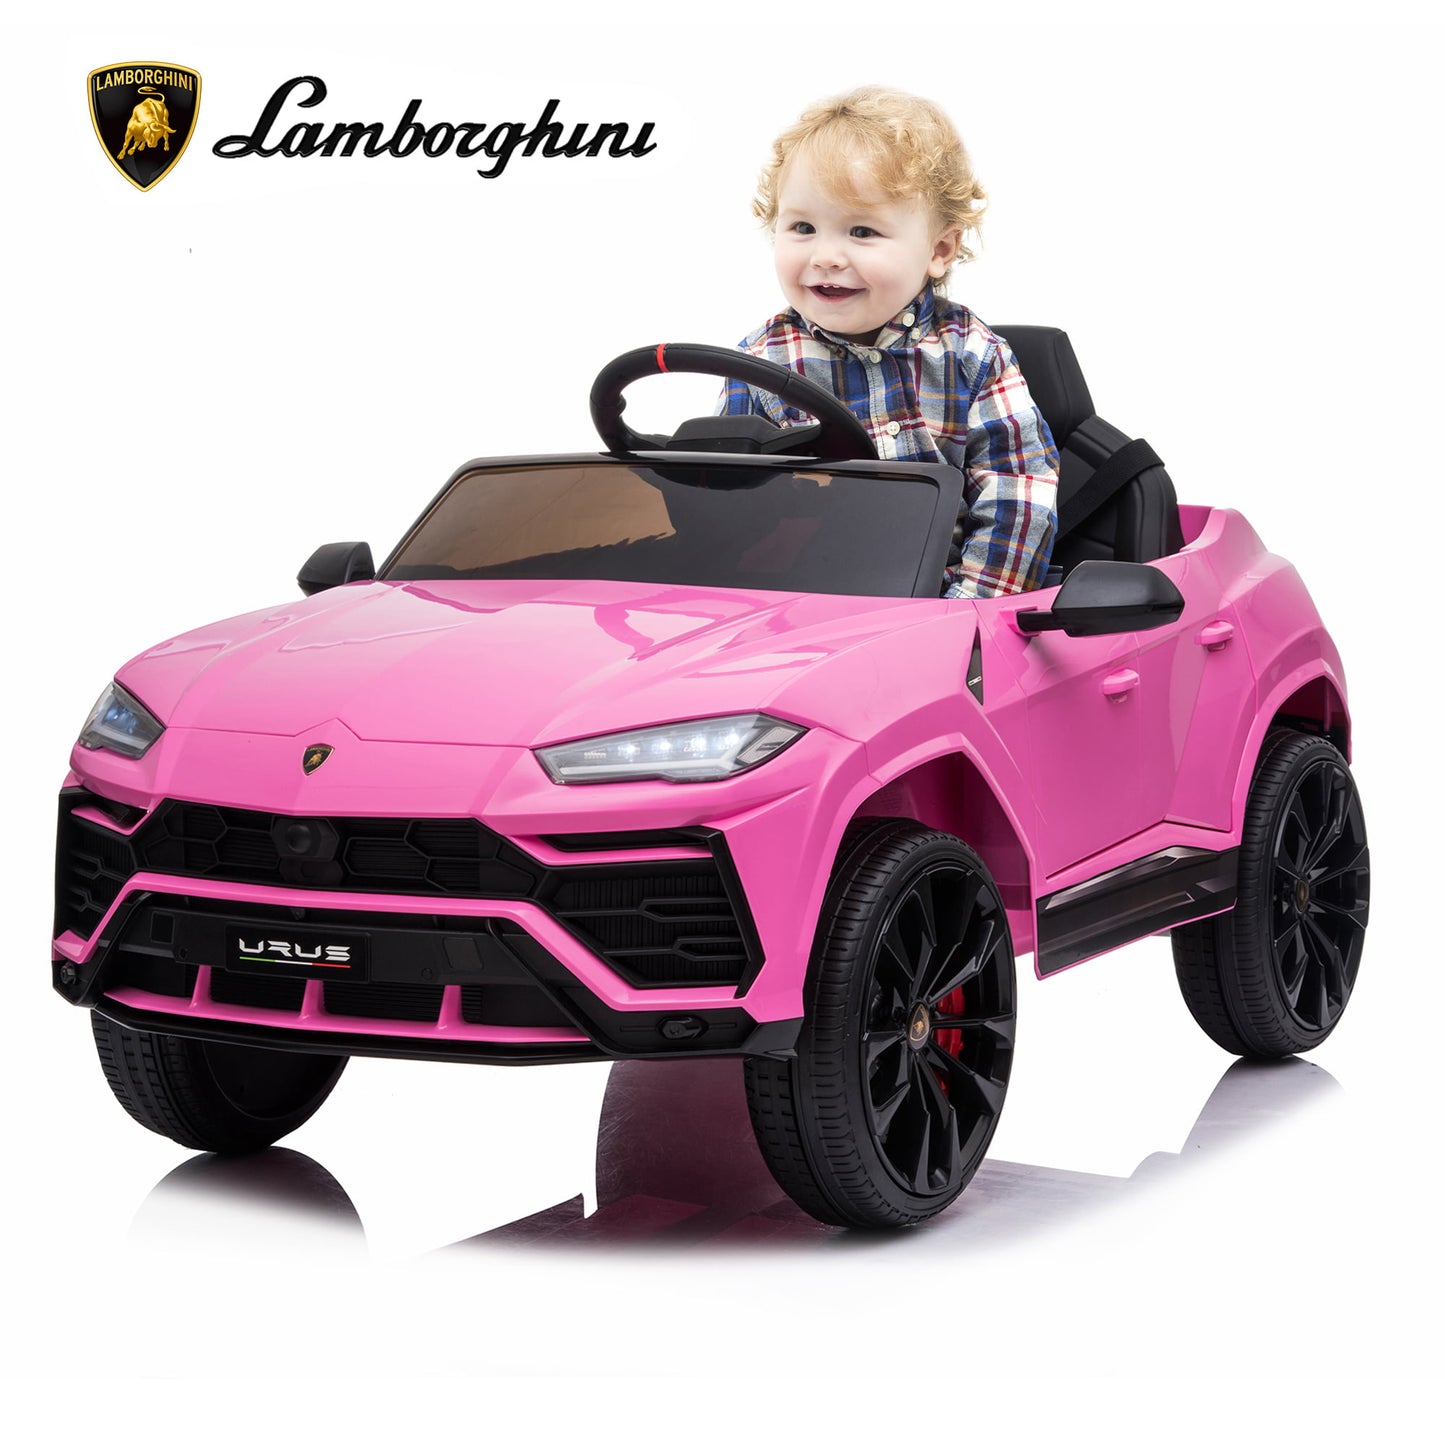 iRerts 12V Lamborghini Charger Boys Girls Kids Ride on Car Toys, Electric Battery Operated Riding Toys with Remote Control for Christmas Birthday Gift,Pink